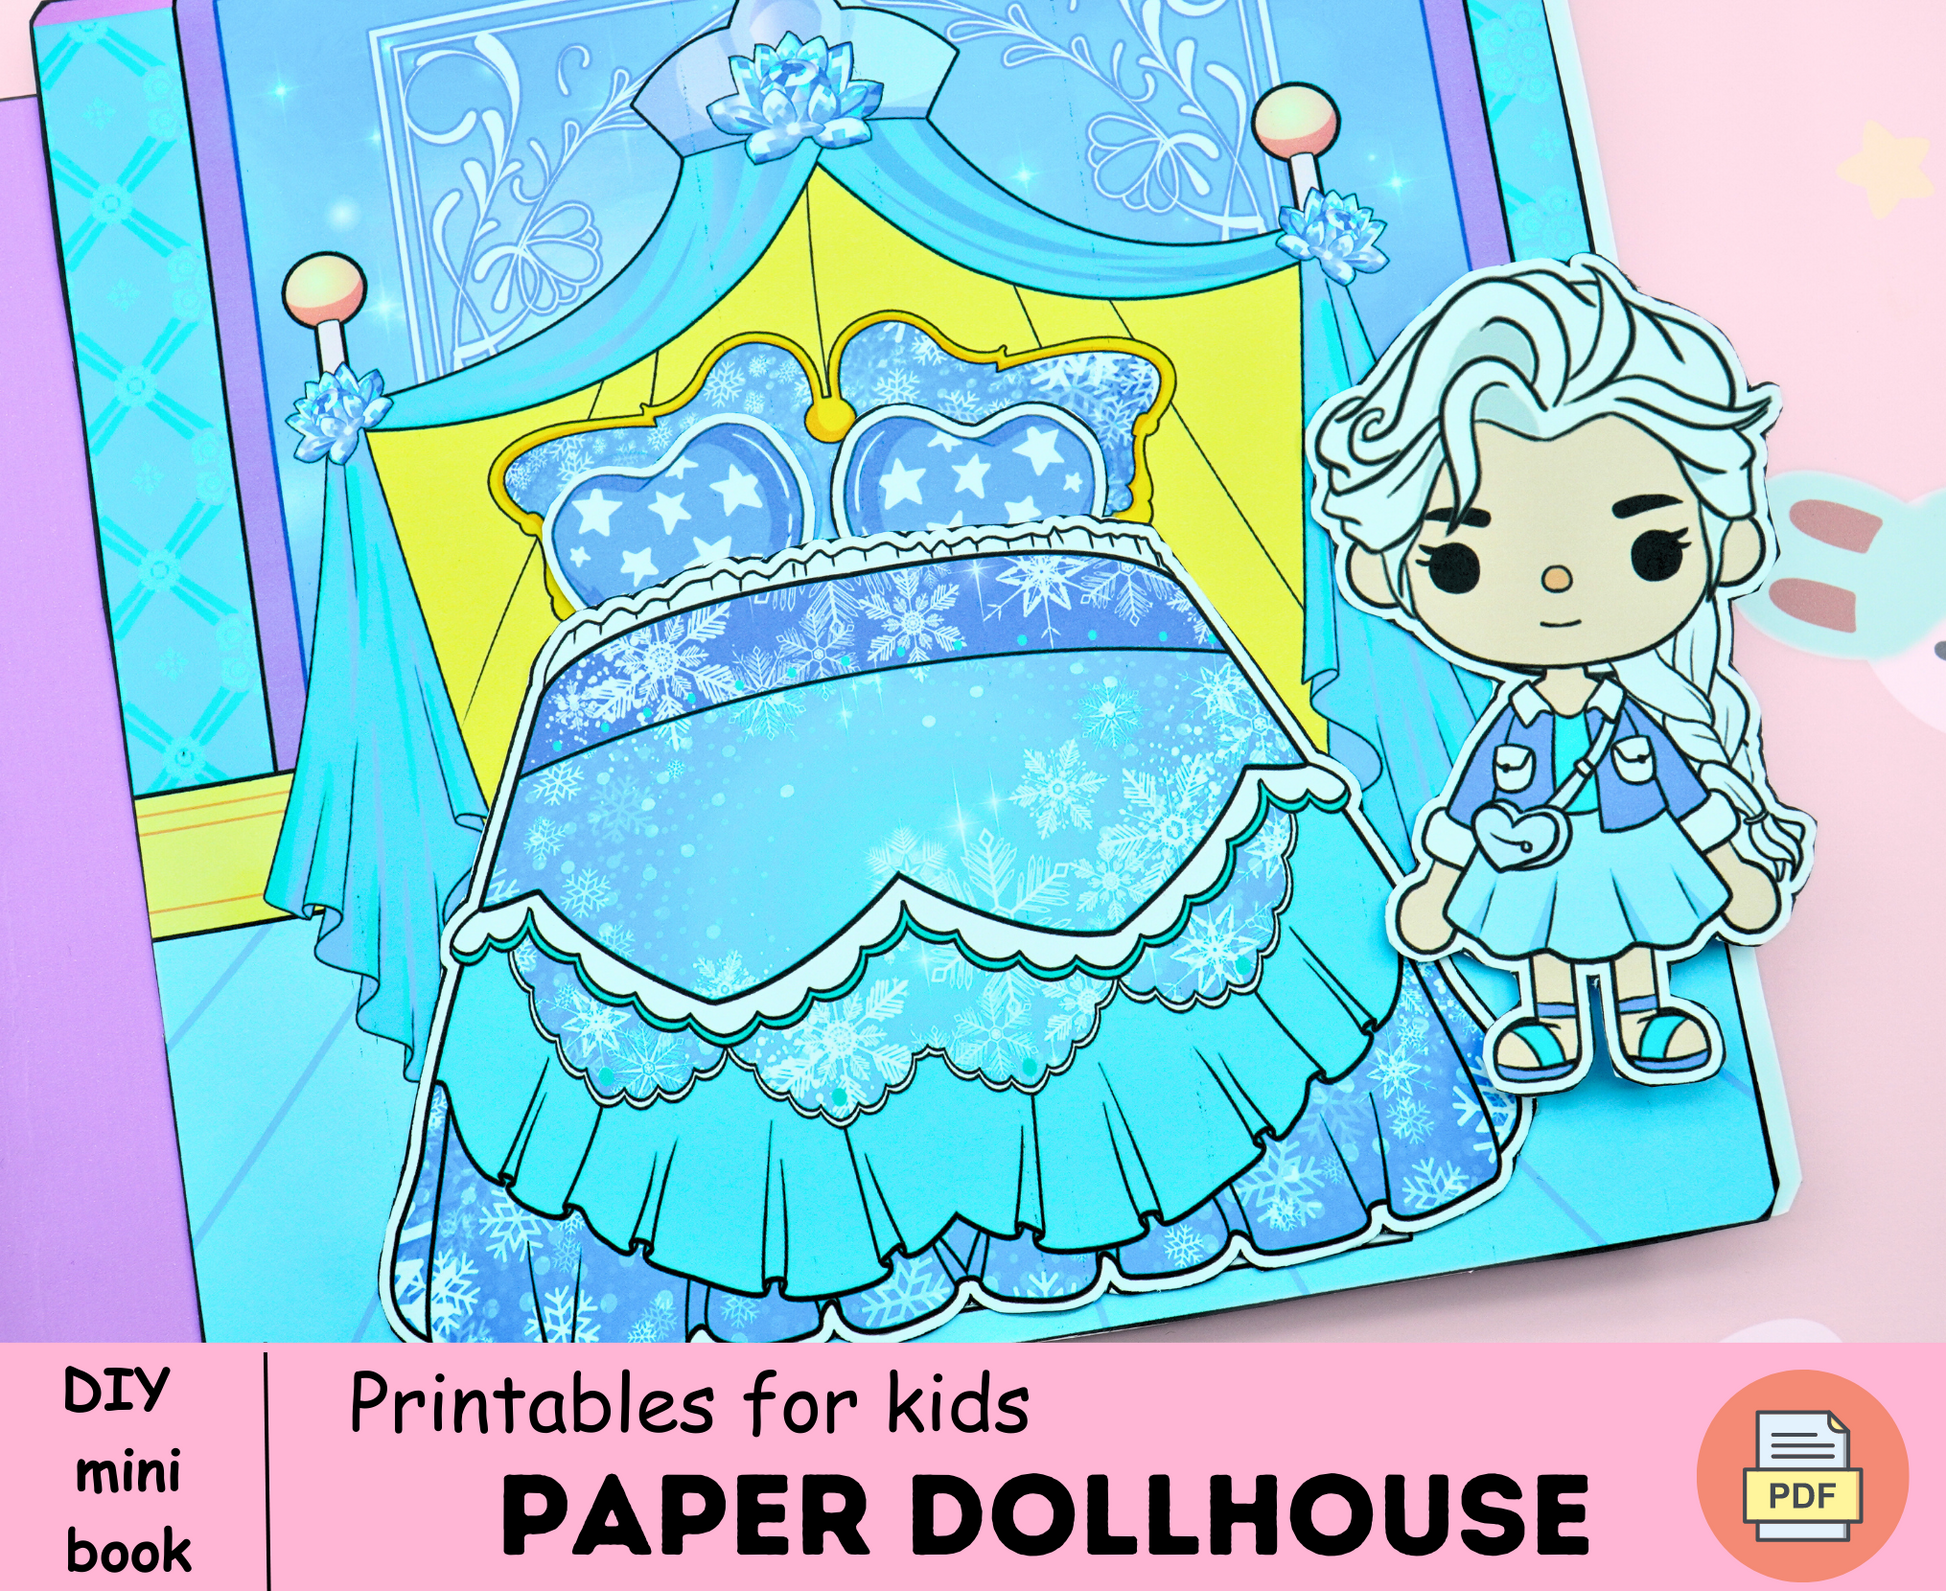 Toca Boca Paper Dolls Emotions / Colored and uncolored / Toca Boca  papercraft / quiet book pages / Printable Paper Doll